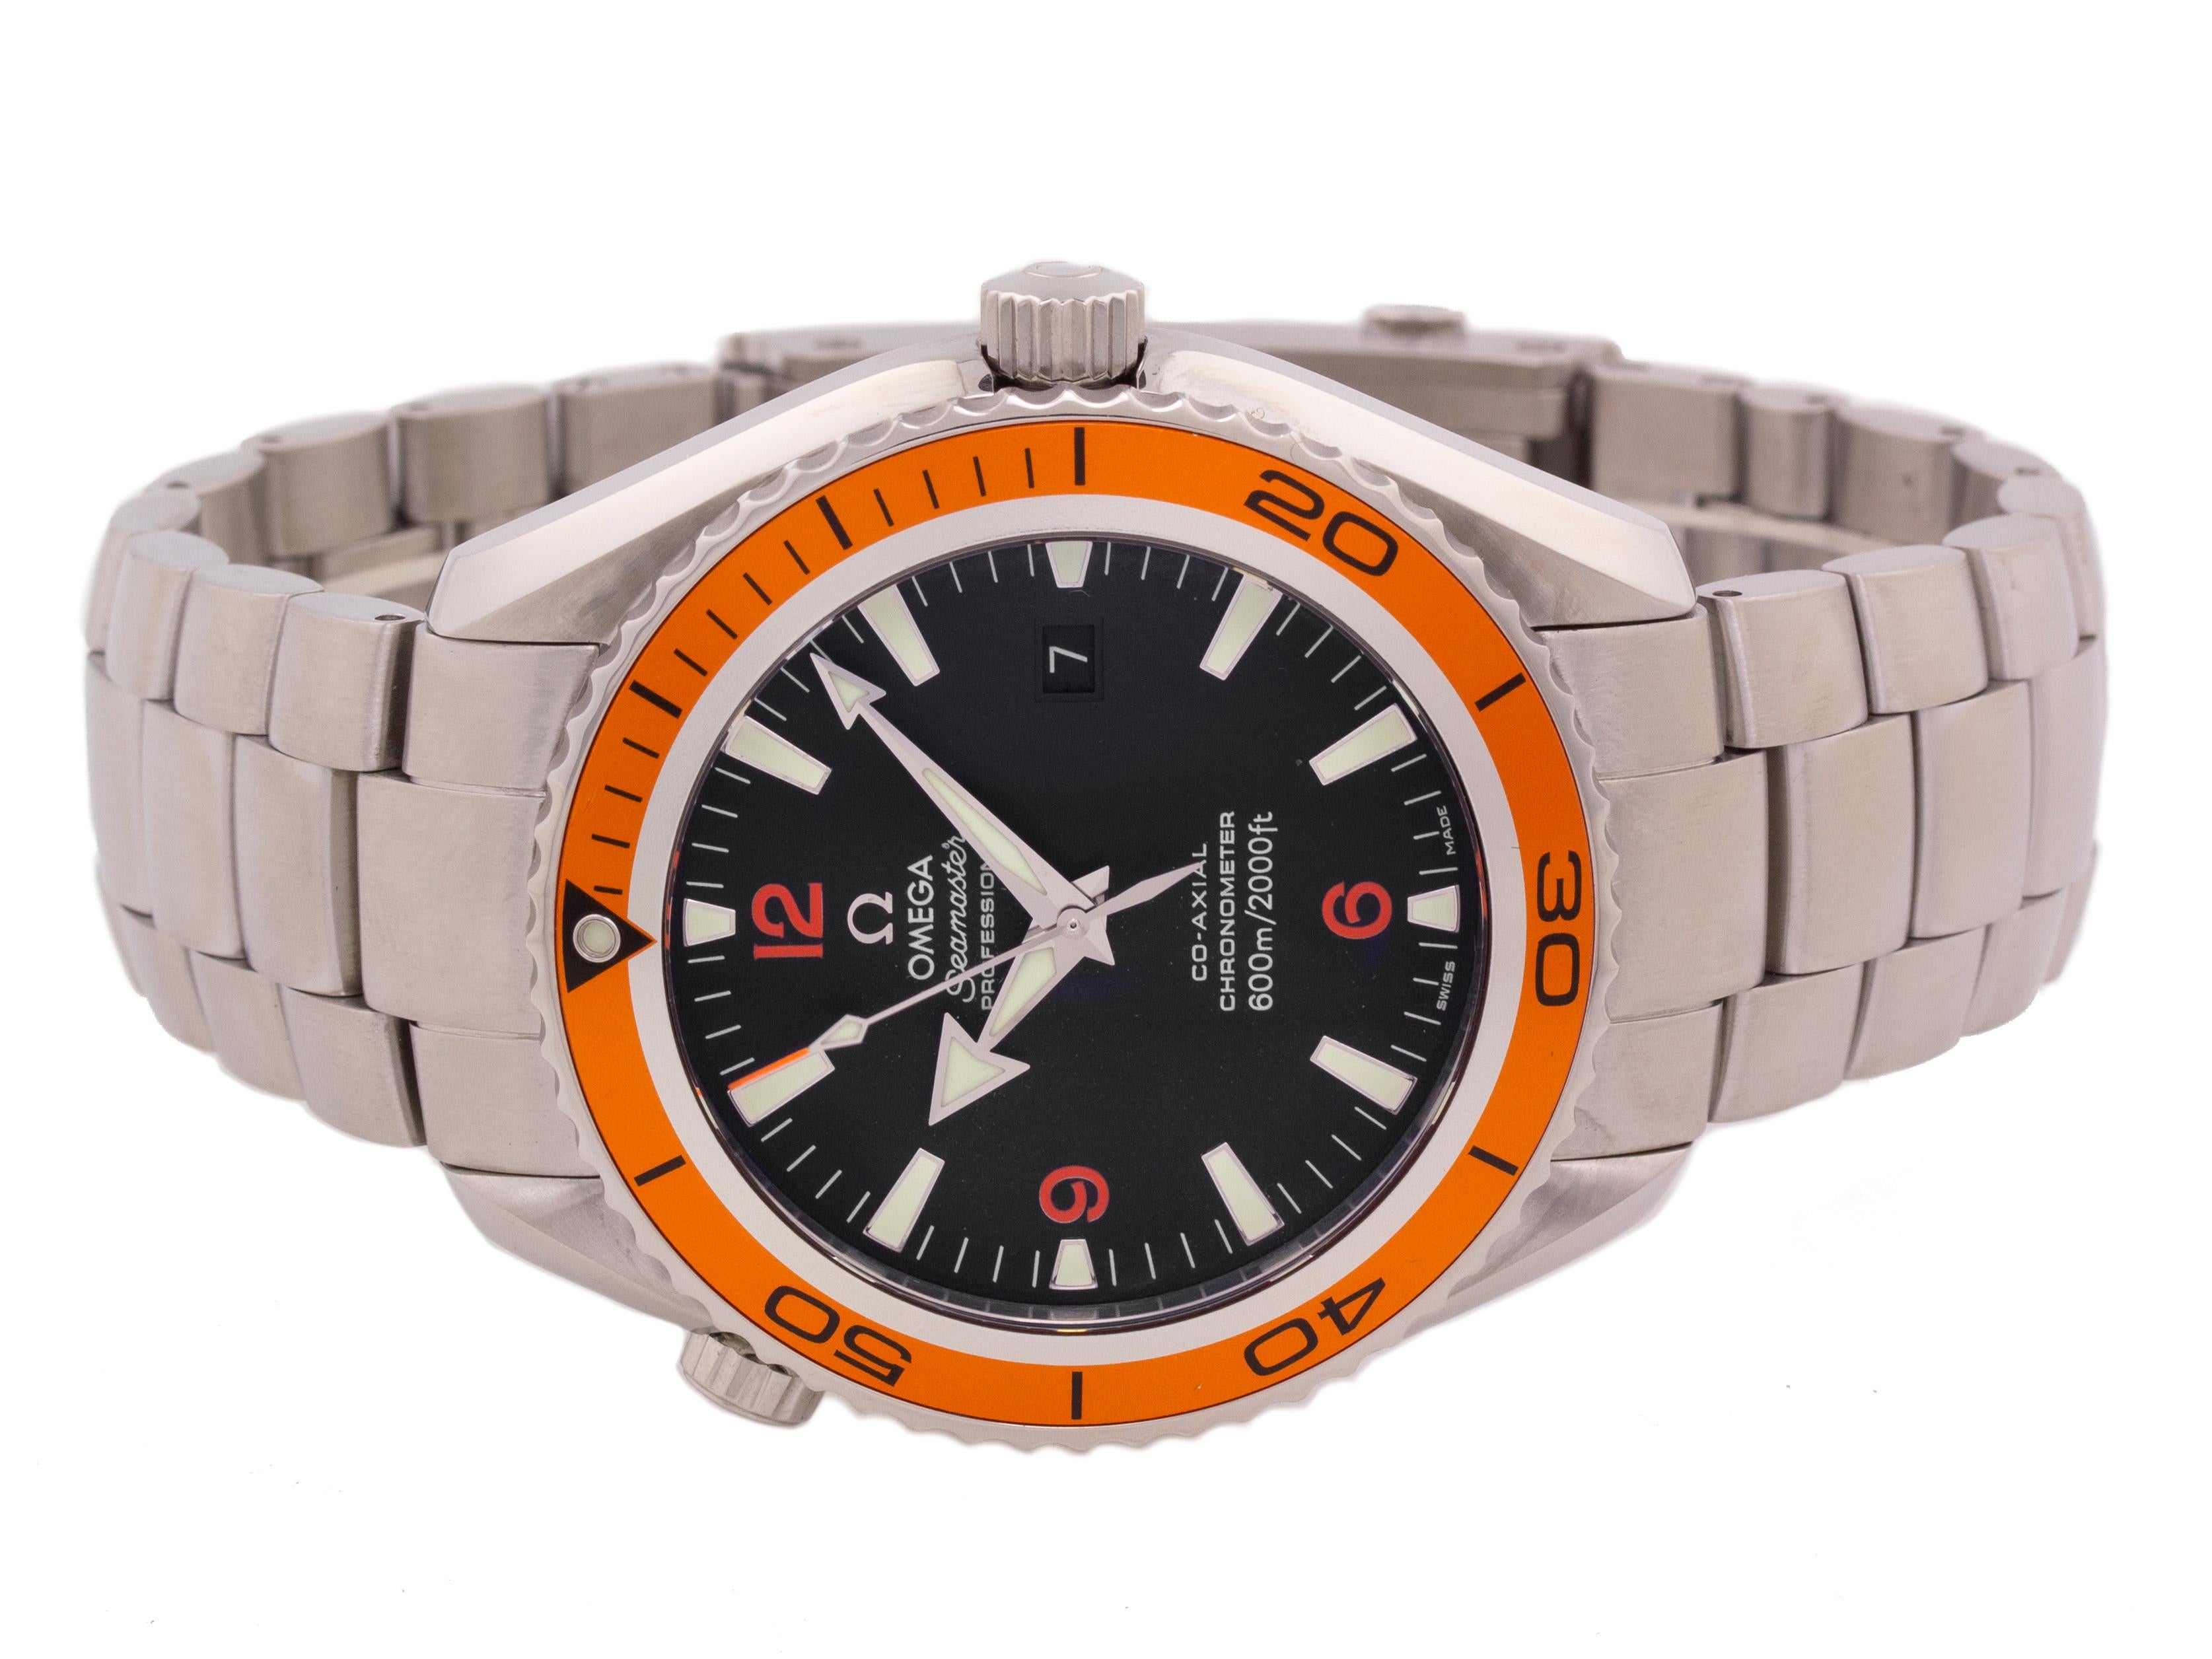 Omega Seamaster Planet Ocean 2209.50.00

Retail Price: $4500.00
Buy It Now: $3250.00

Great condition gently pre-owned watch. This watch was purchased within our store directly from the previous customer. This watch has been fully refinished,